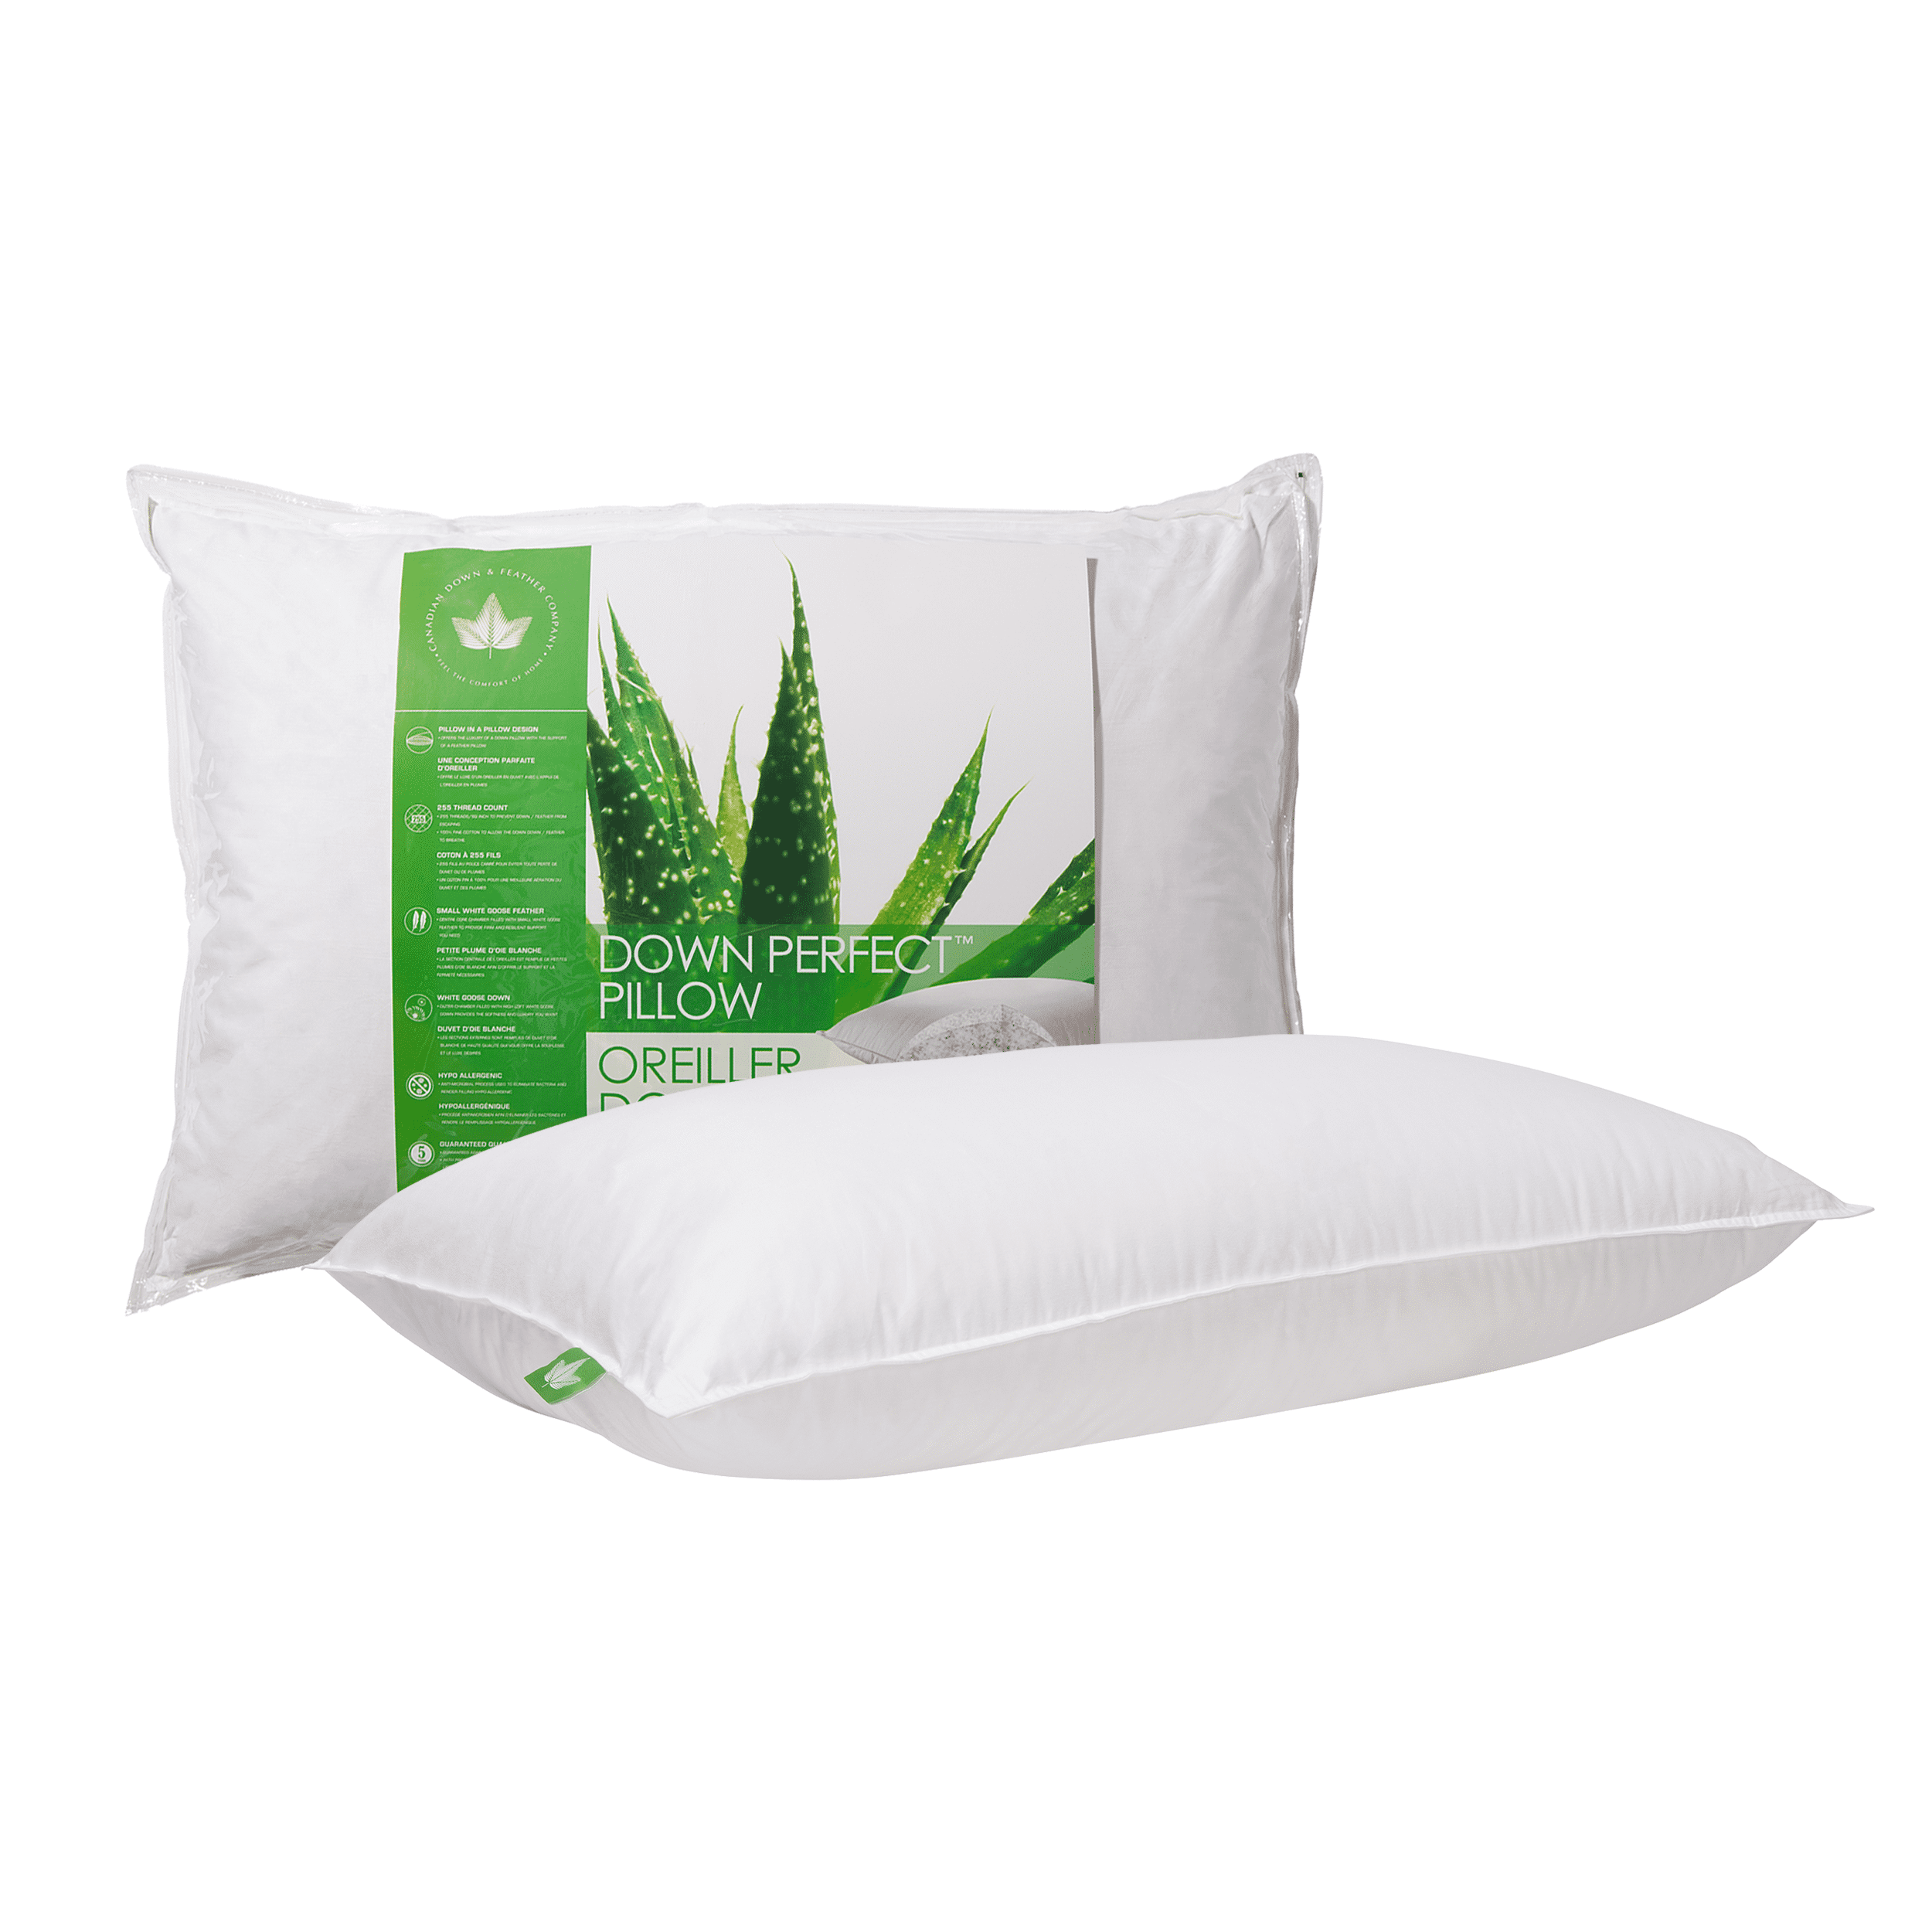 Down Perfect Pillow - Medium Support - King Size